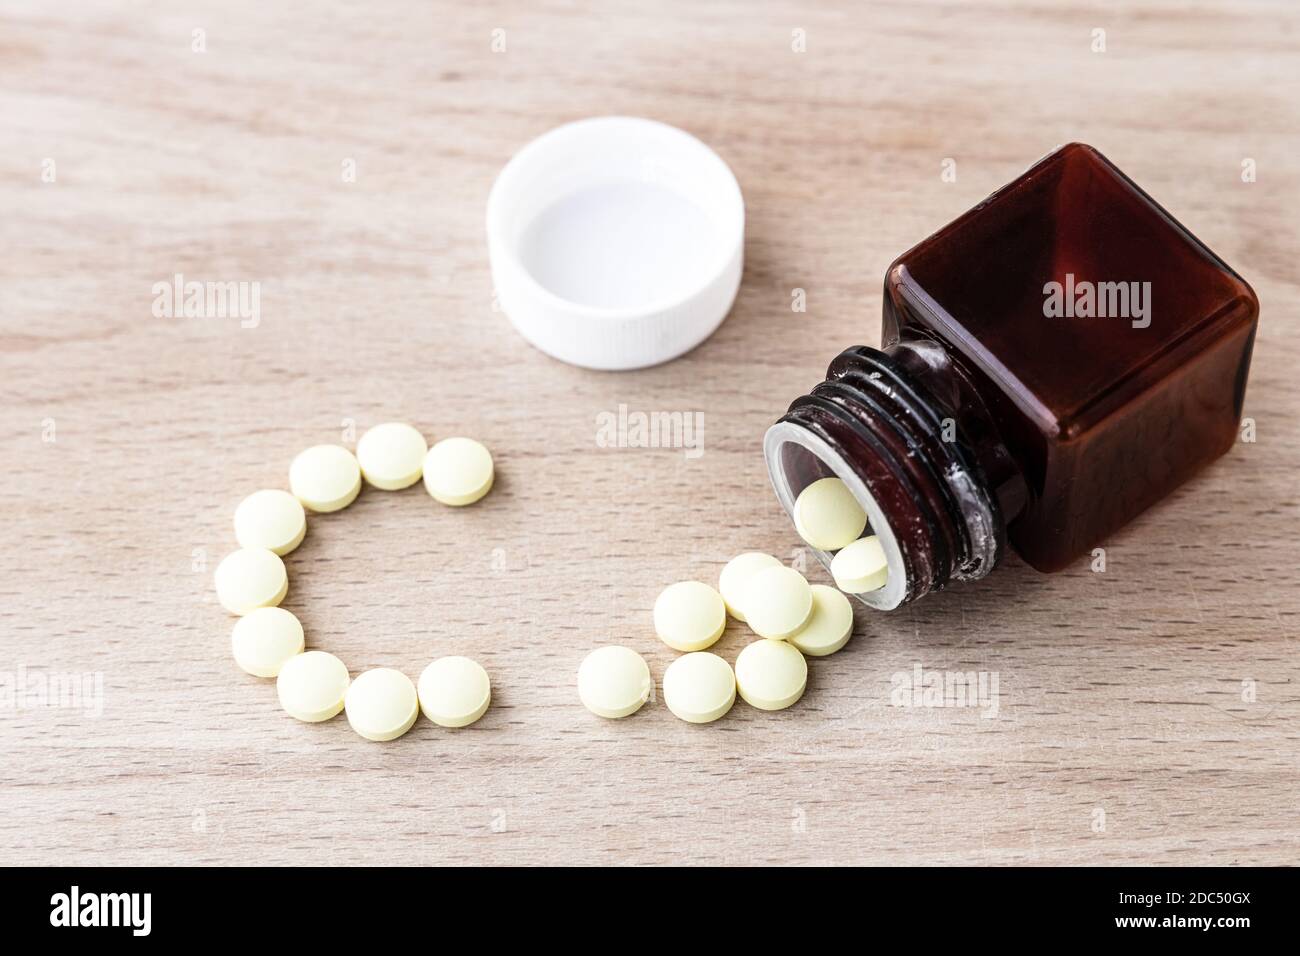 Vitamin C yellow pills and bottle on wooden background Stock Photo